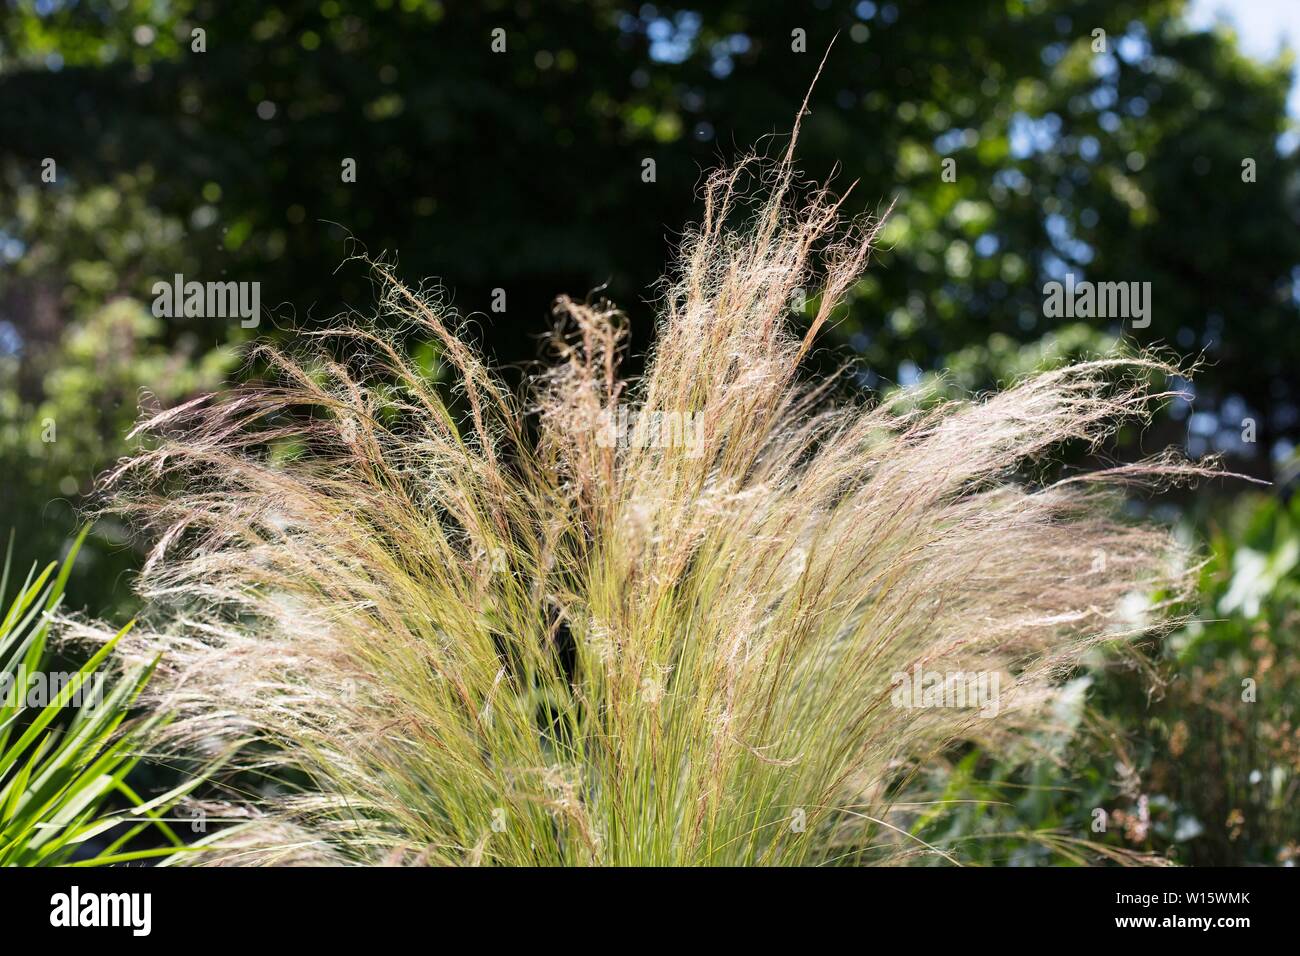 Mexican Feather Grass - Nassella. Stock Photo